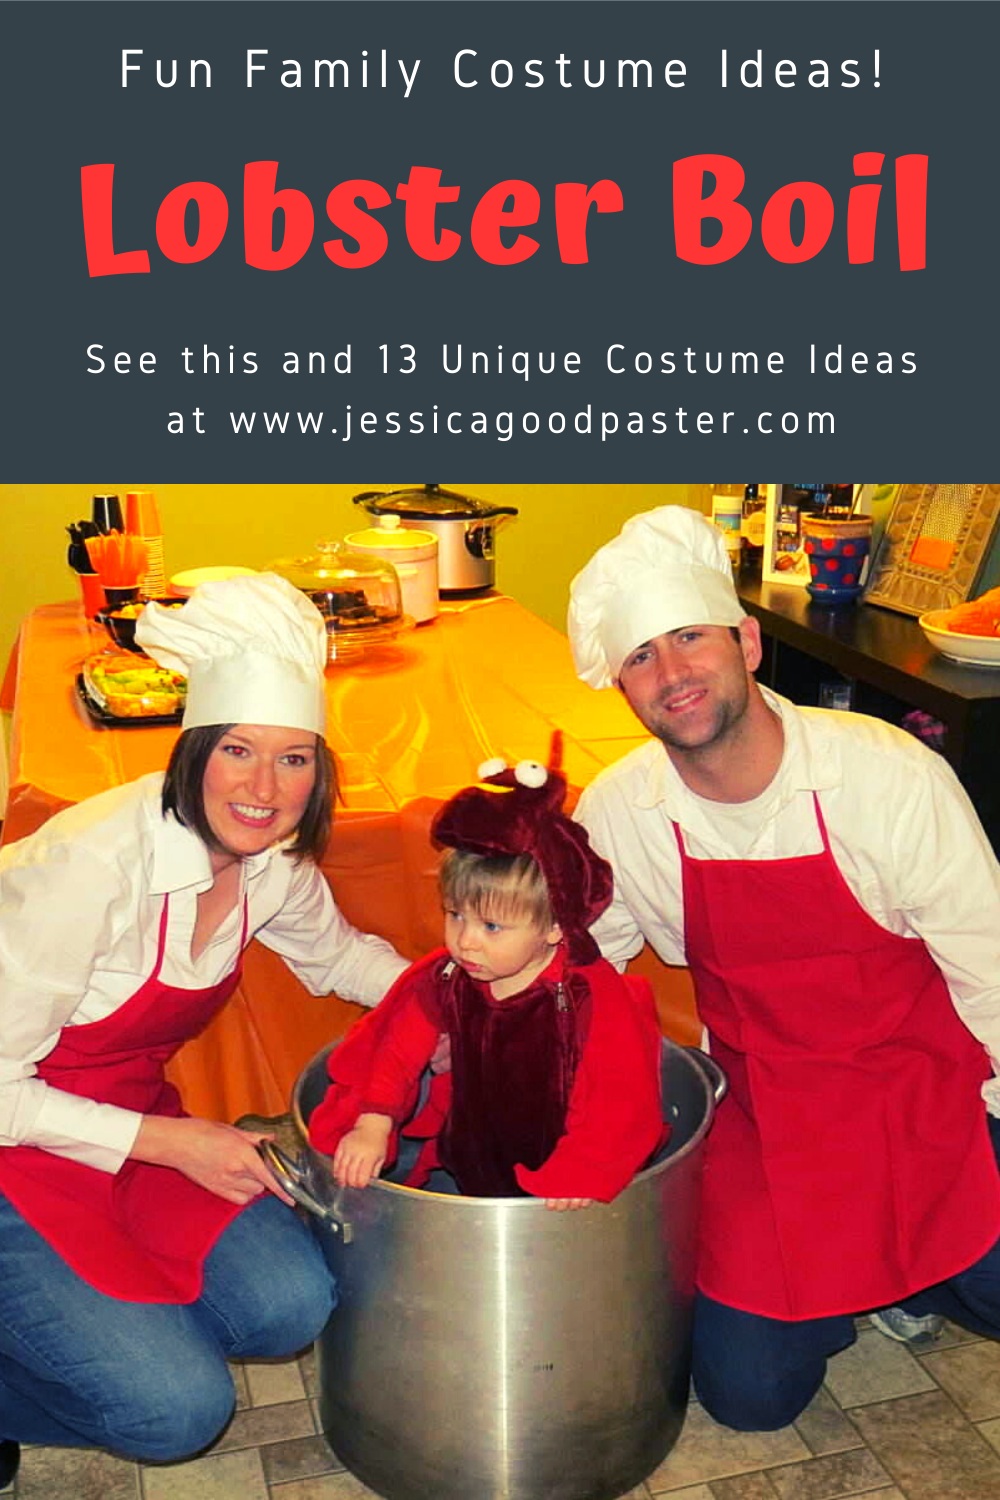 Lobster Boil Family Costume and 13 Unique Halloween Costume Ideas for Your Family or Group! Find the perfect costume for individuals, couples, families, groups, and kids. Includes some of the best DIY costume ideas as well. #halloween #costumes #halloweencostumes #couplecostumes #groupcostume #diycostumes #familycostume #trunkortreat